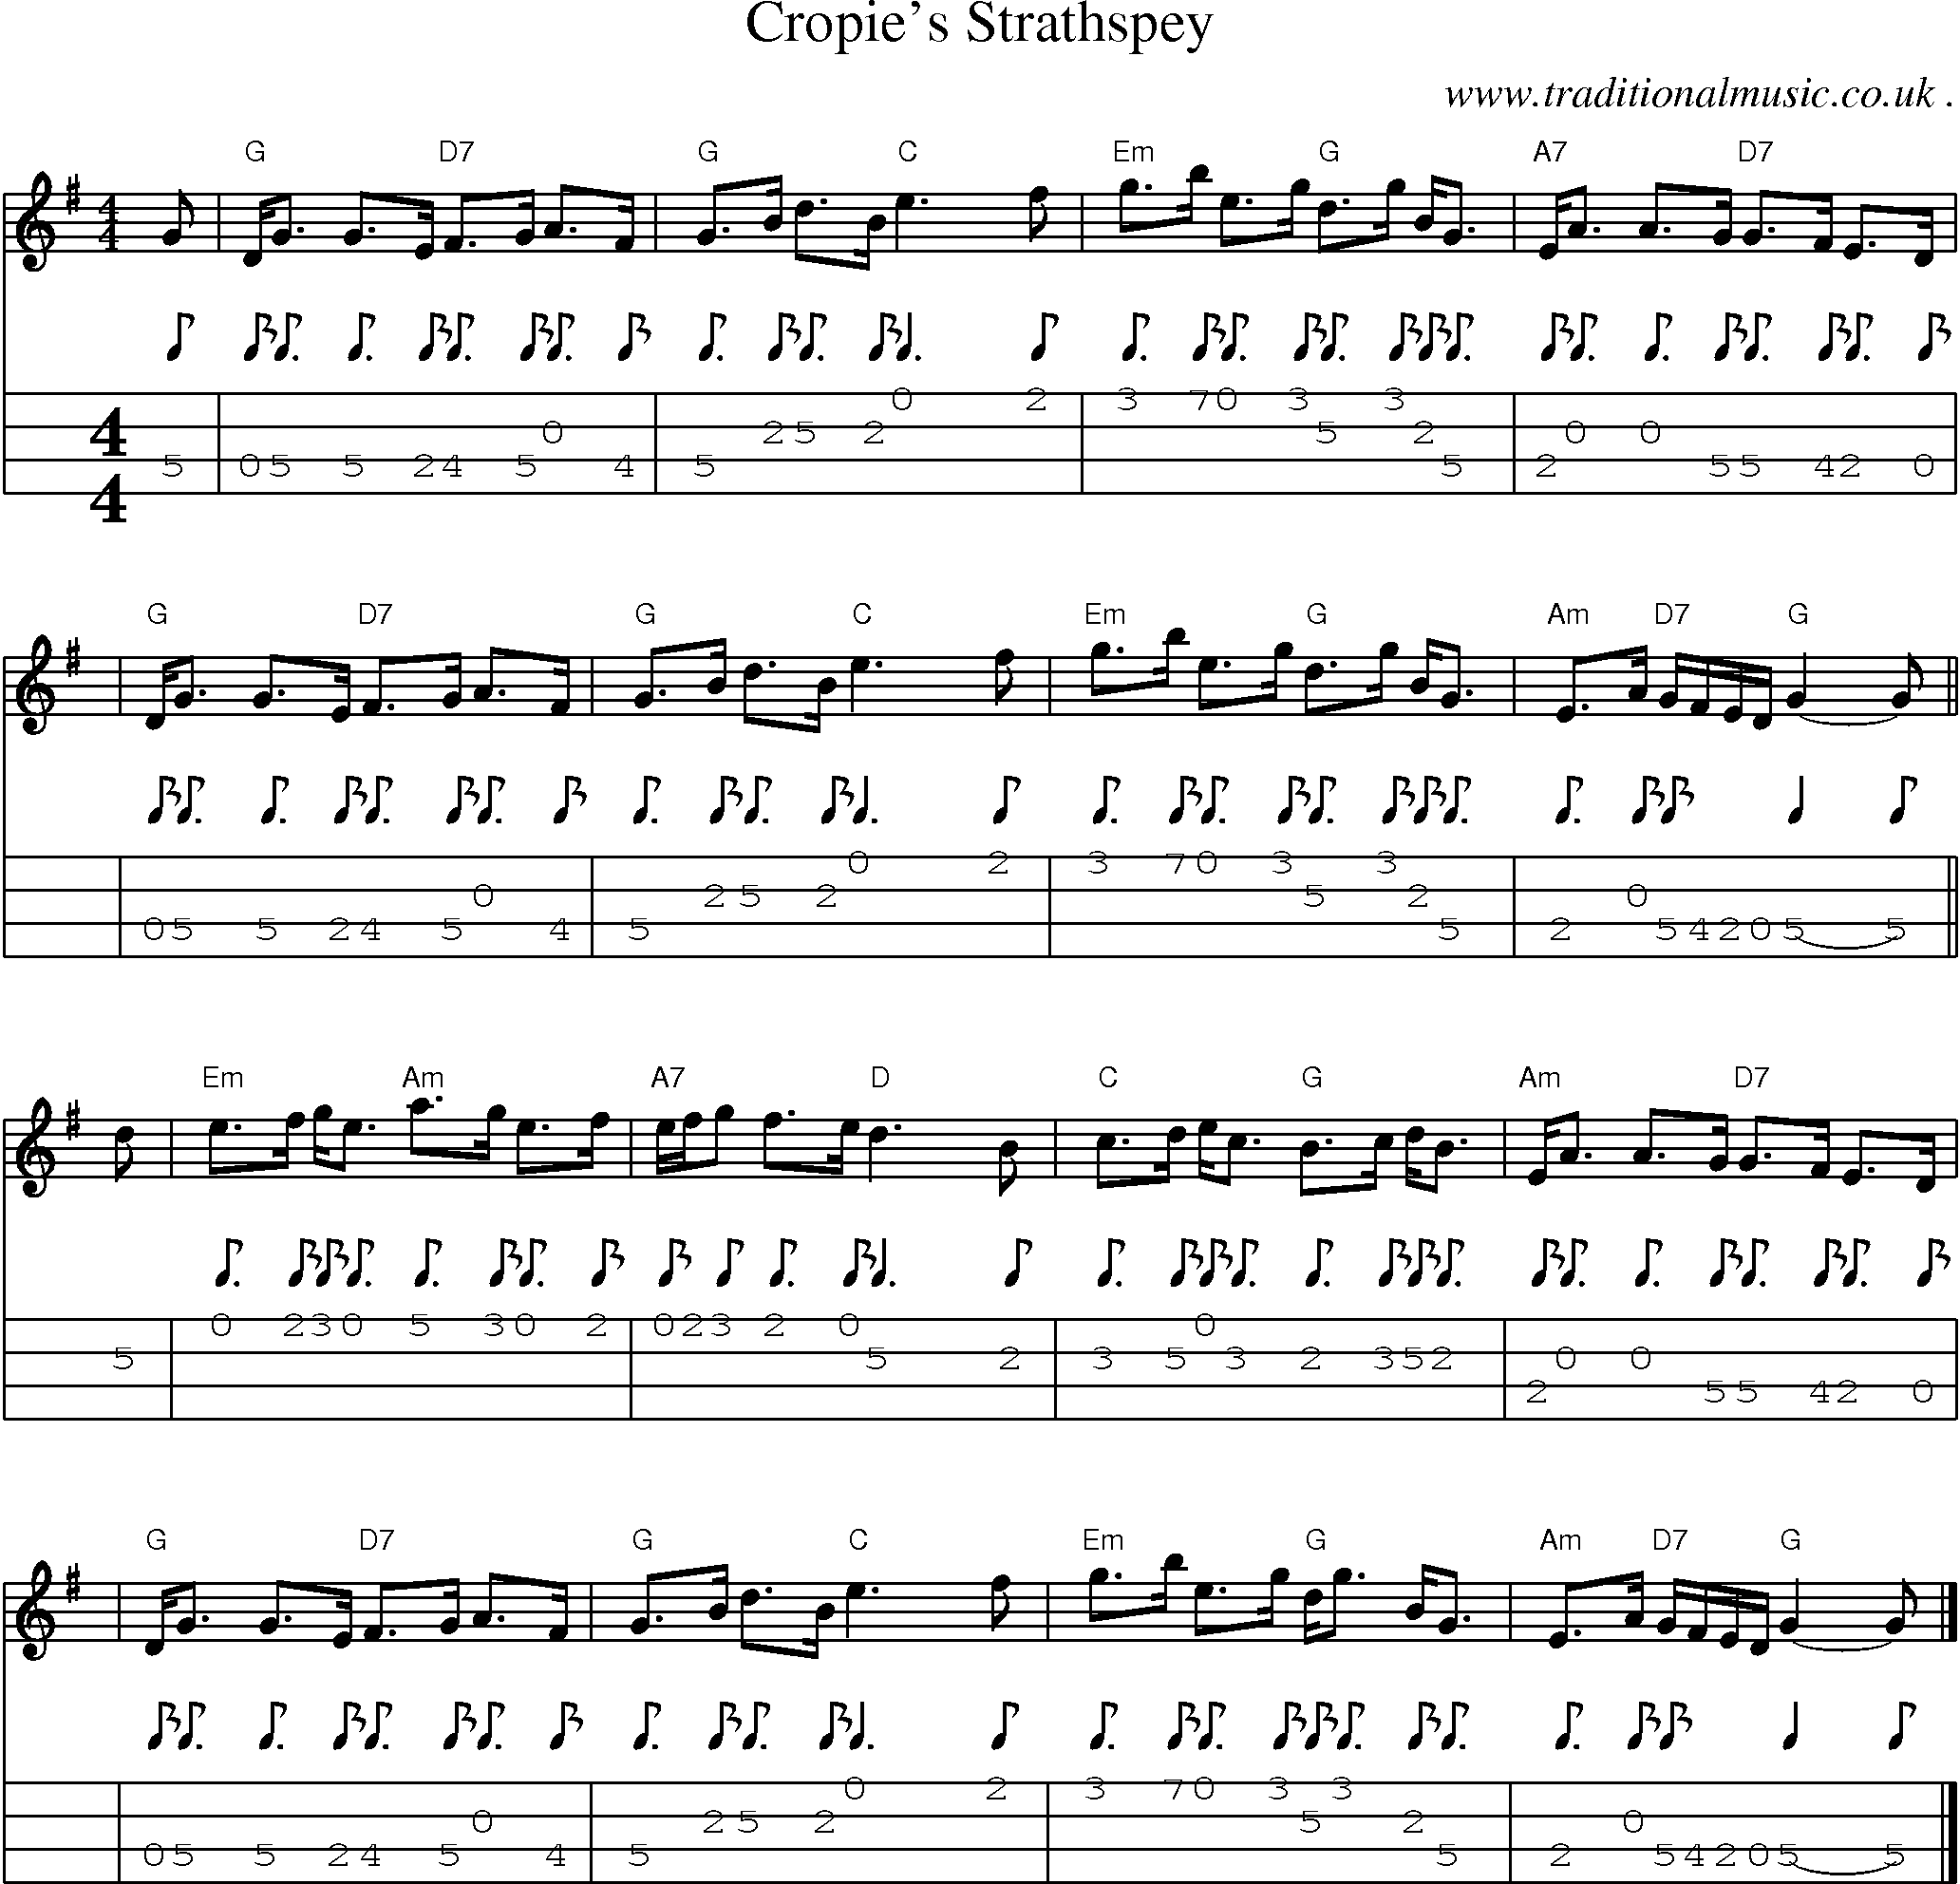 Sheet-music  score, Chords and Mandolin Tabs for Cropies Strathspey